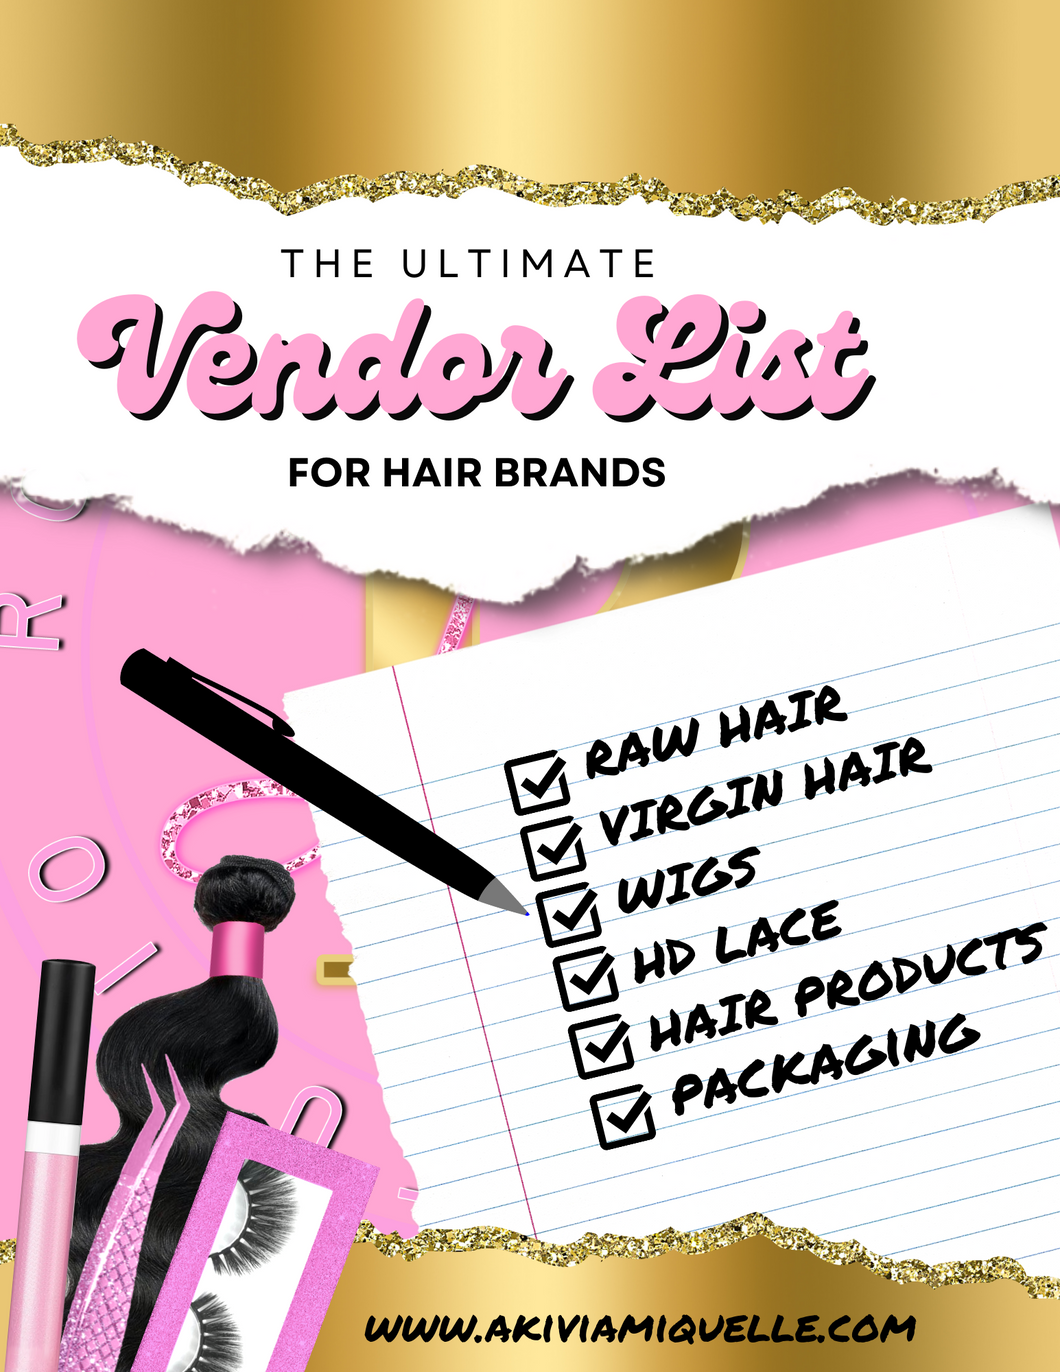 The Ultimate Vendor List for Hair Brands